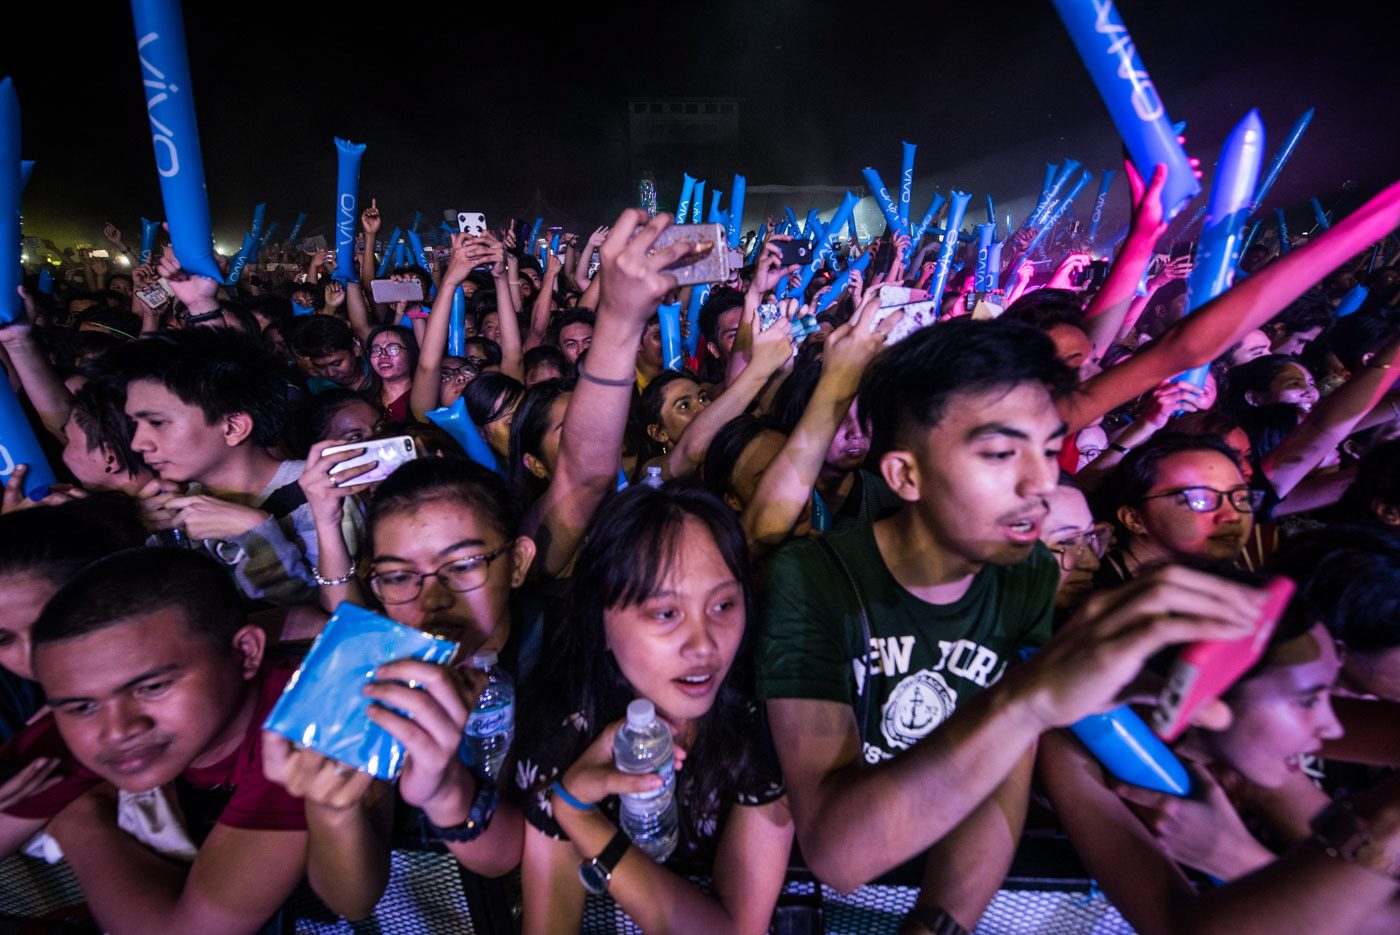 Local bands perform at UP Fair for press freedom